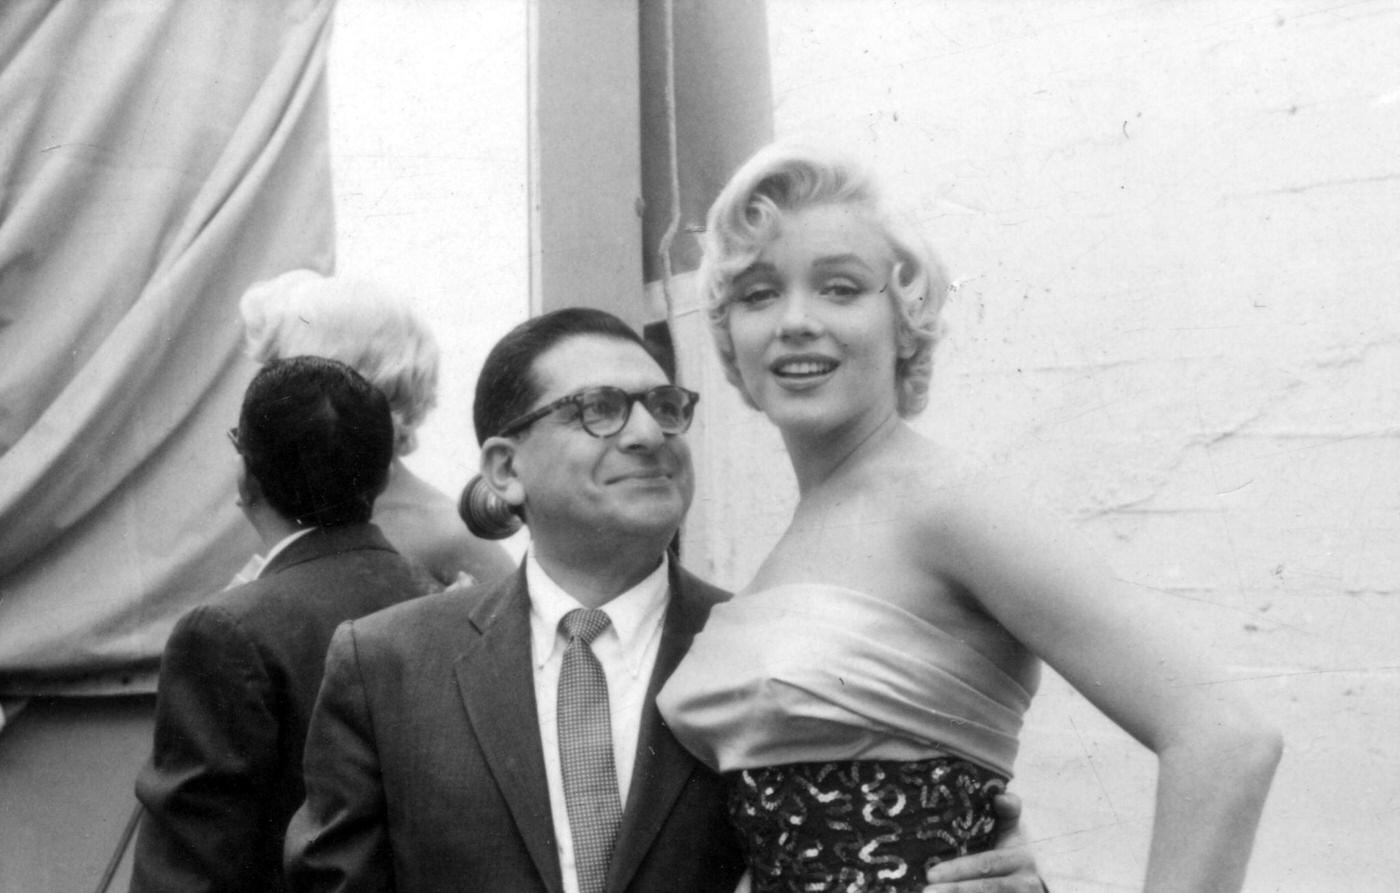 Marilyn Monroe with newspaper columnist Sidney Skolsky on set while working on the Dazzledent Toothpaste commercial sequence in 1954 for "The Seven Year Itch"